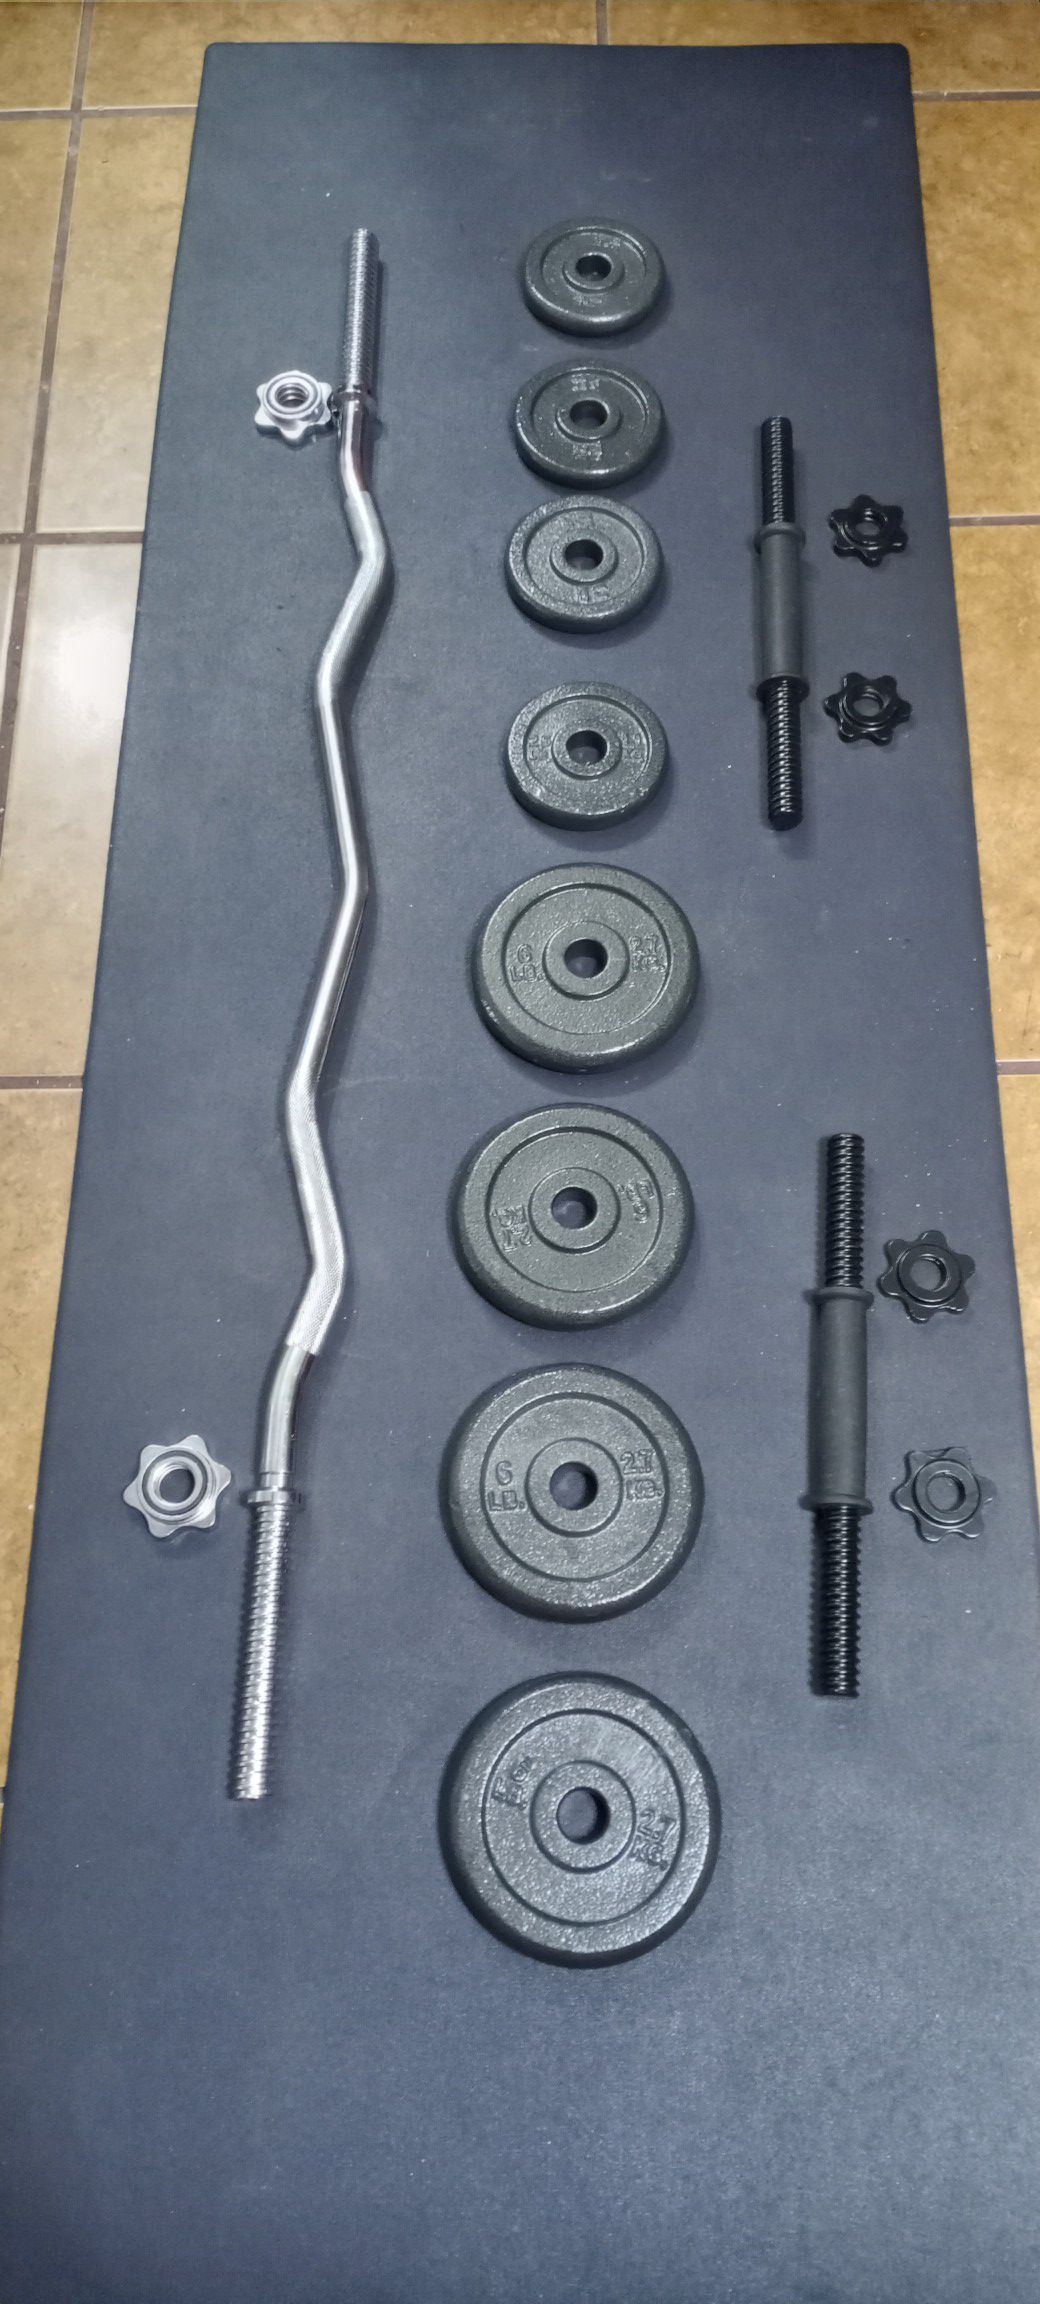 40 LBS.ADJUSTABLE CAST IRON DUMBBELL SET .PLUS CURL BAR. BRAND NEW IN BOX